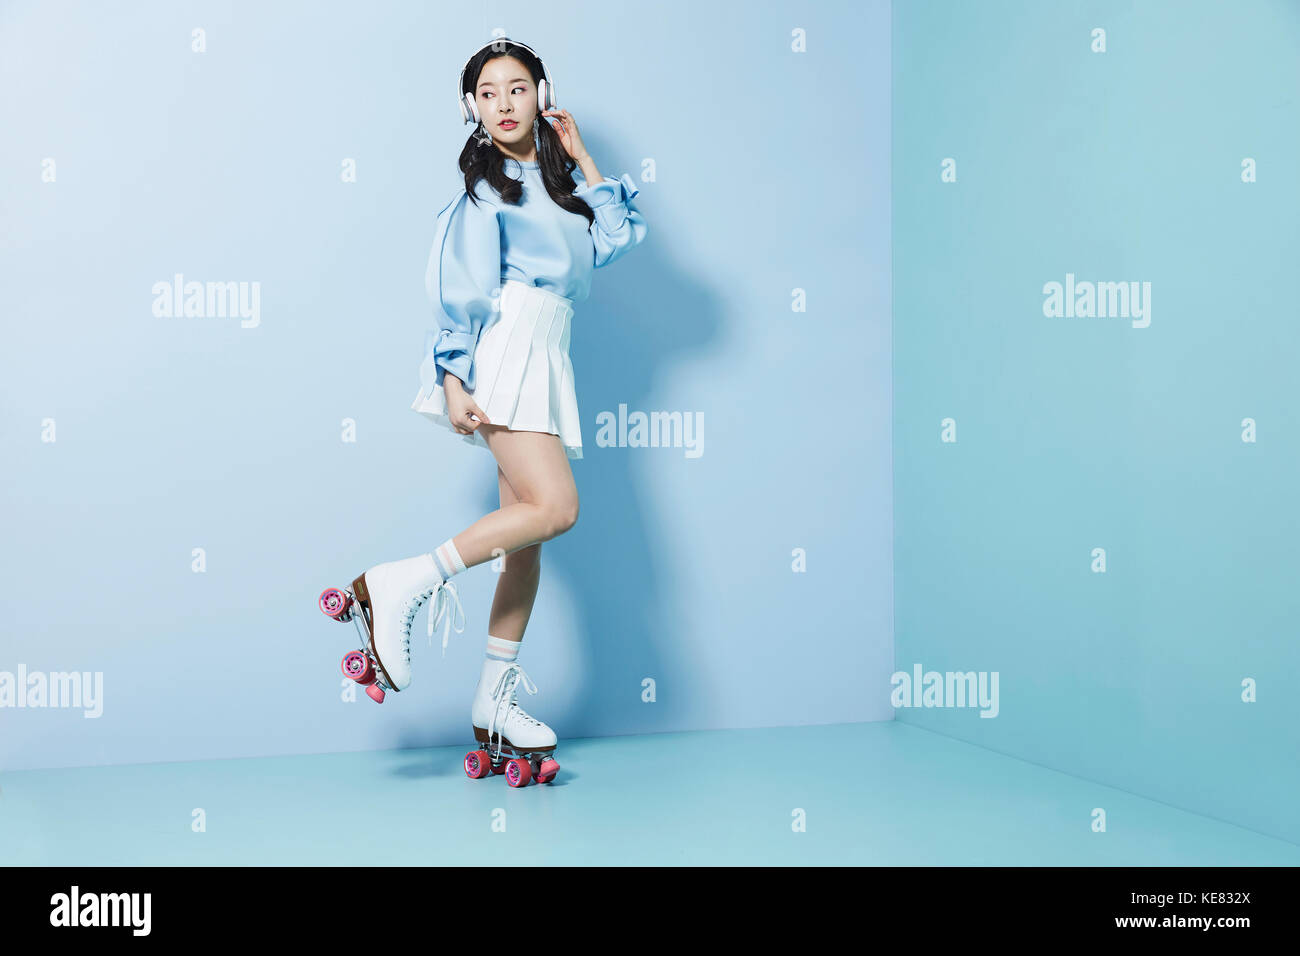 Young woman wearing roller skates and headphones posing on one foot Stock Photo